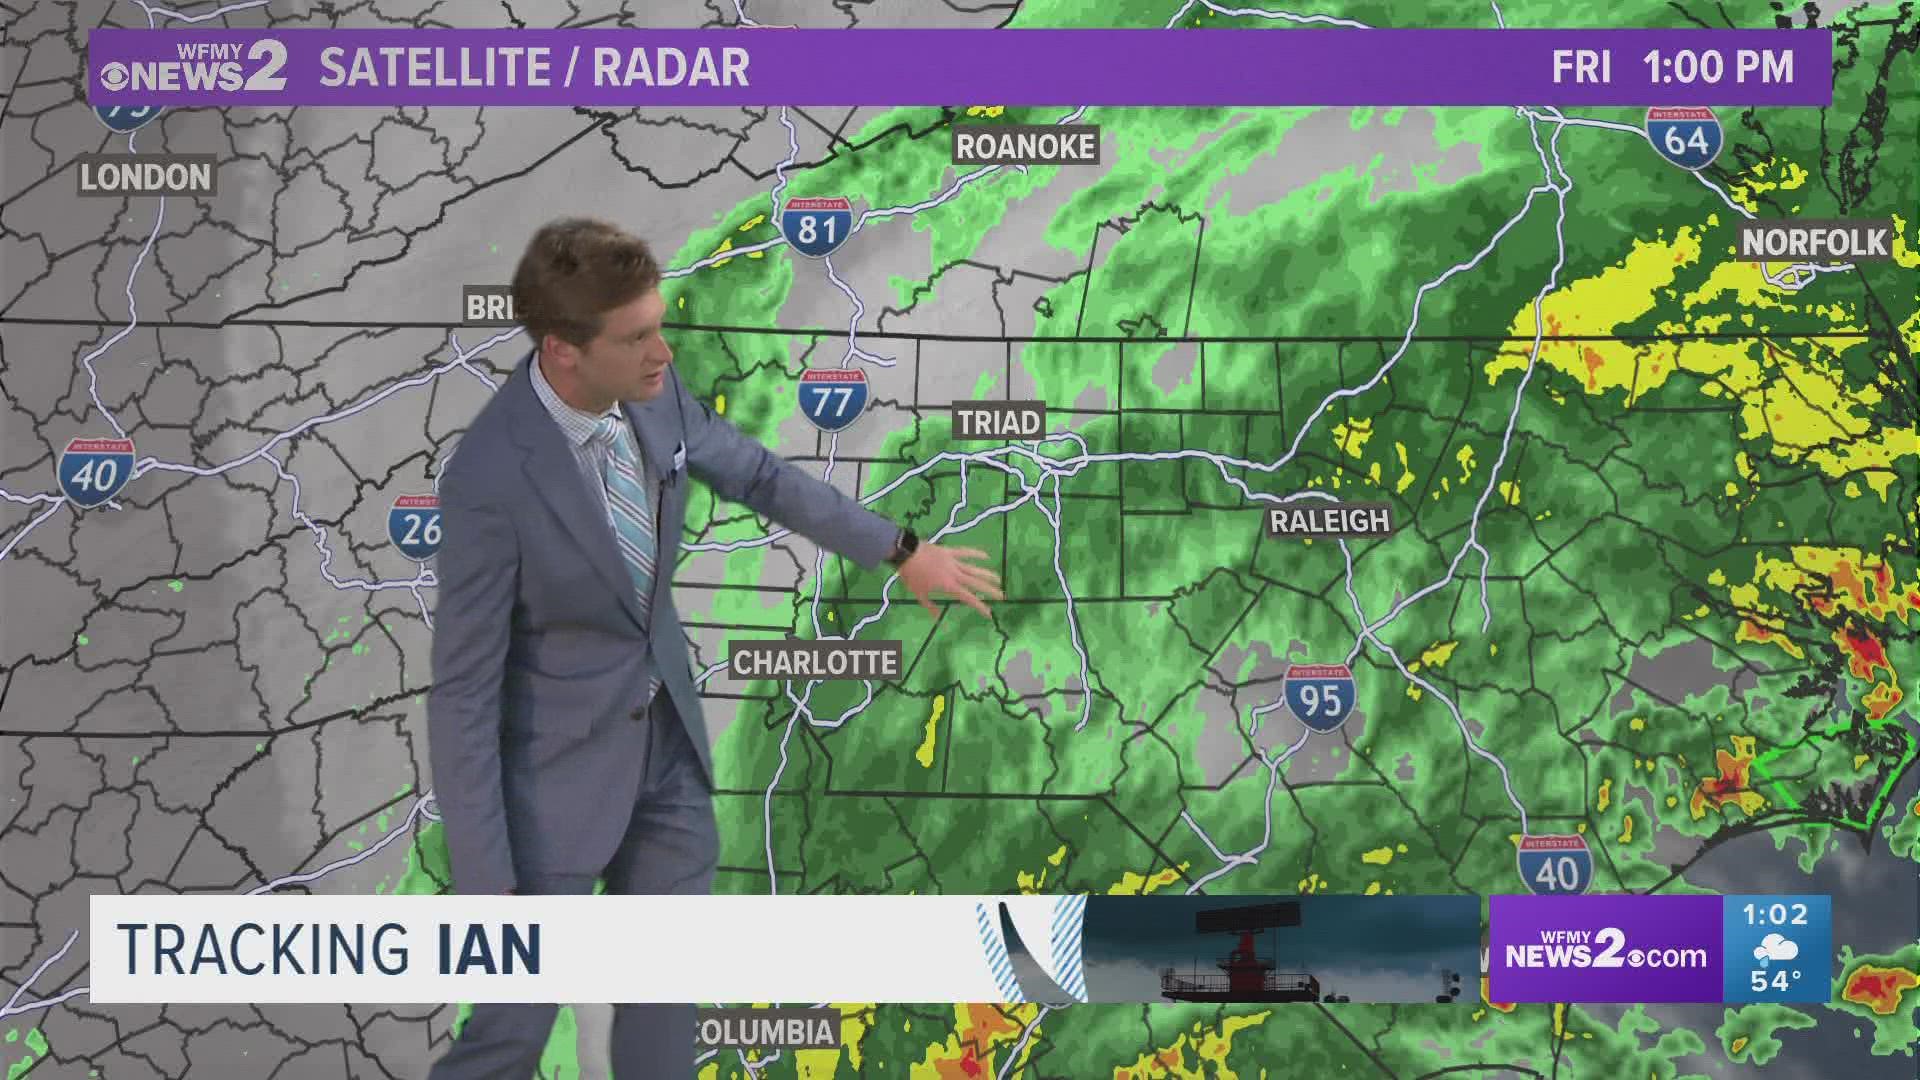 Meteorologist Christian Morgan details Hurricane Ian’s path as it approaches the SC coastline moving closer to the Triad.